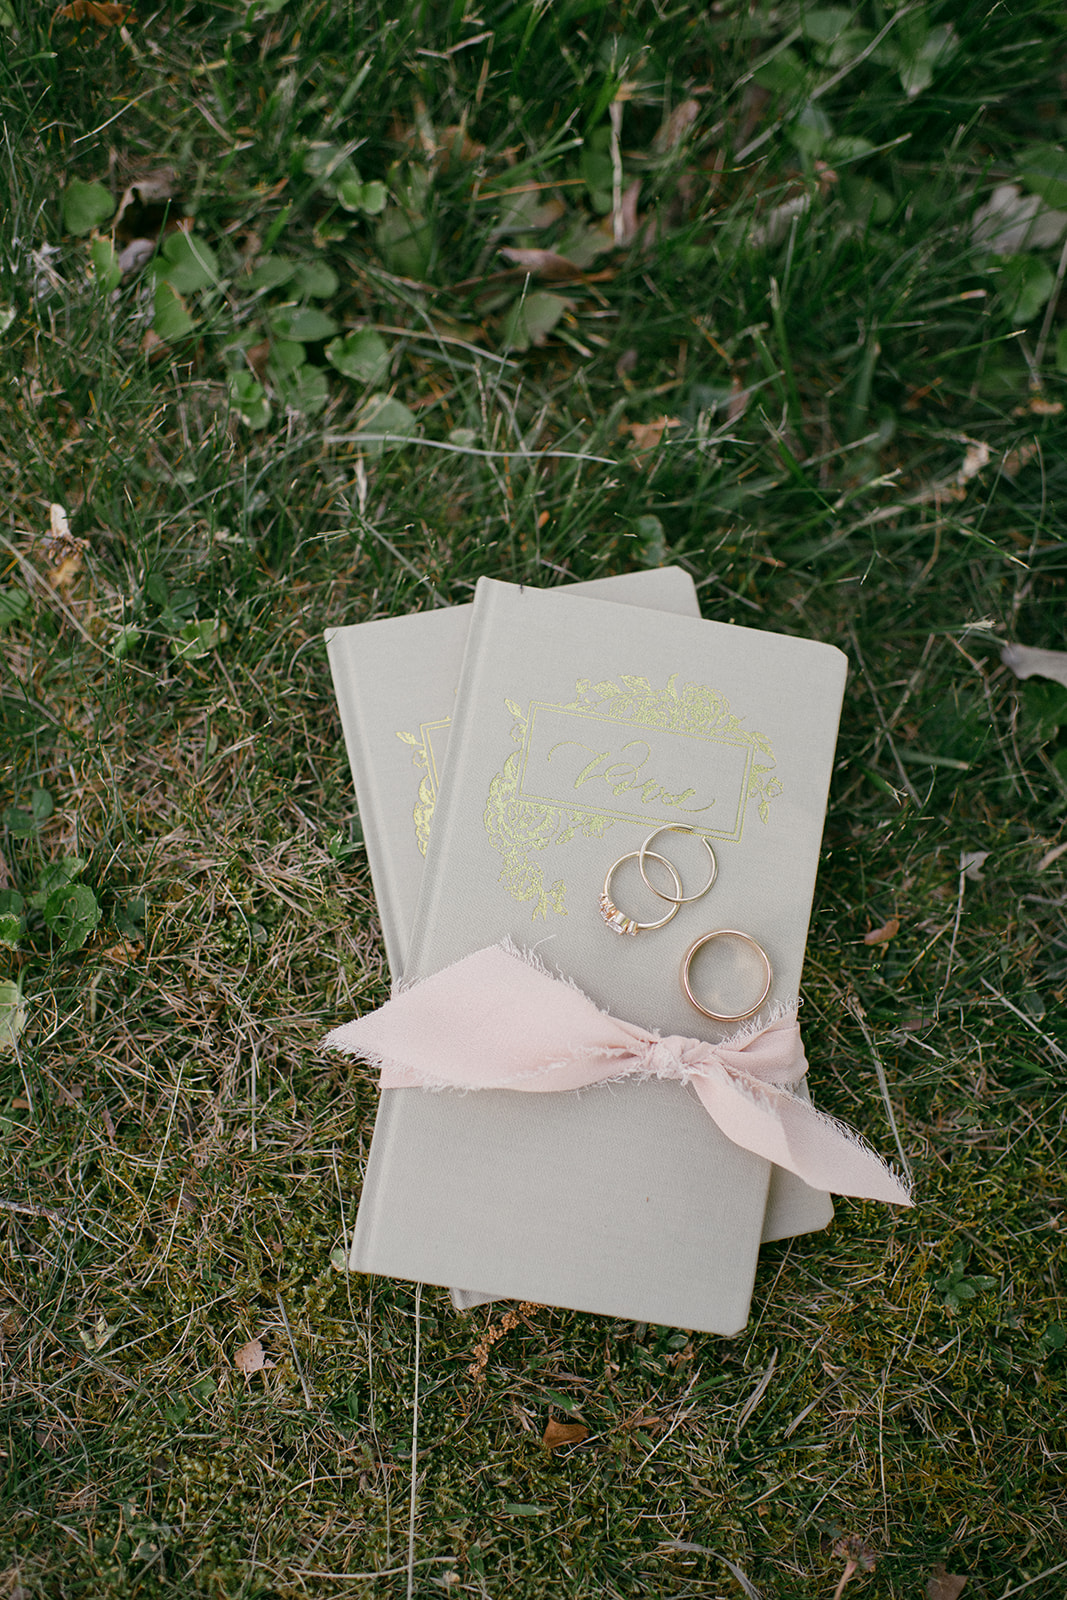 Sewanee Tennessee Spring Wedding Inspired by Wes Anderson